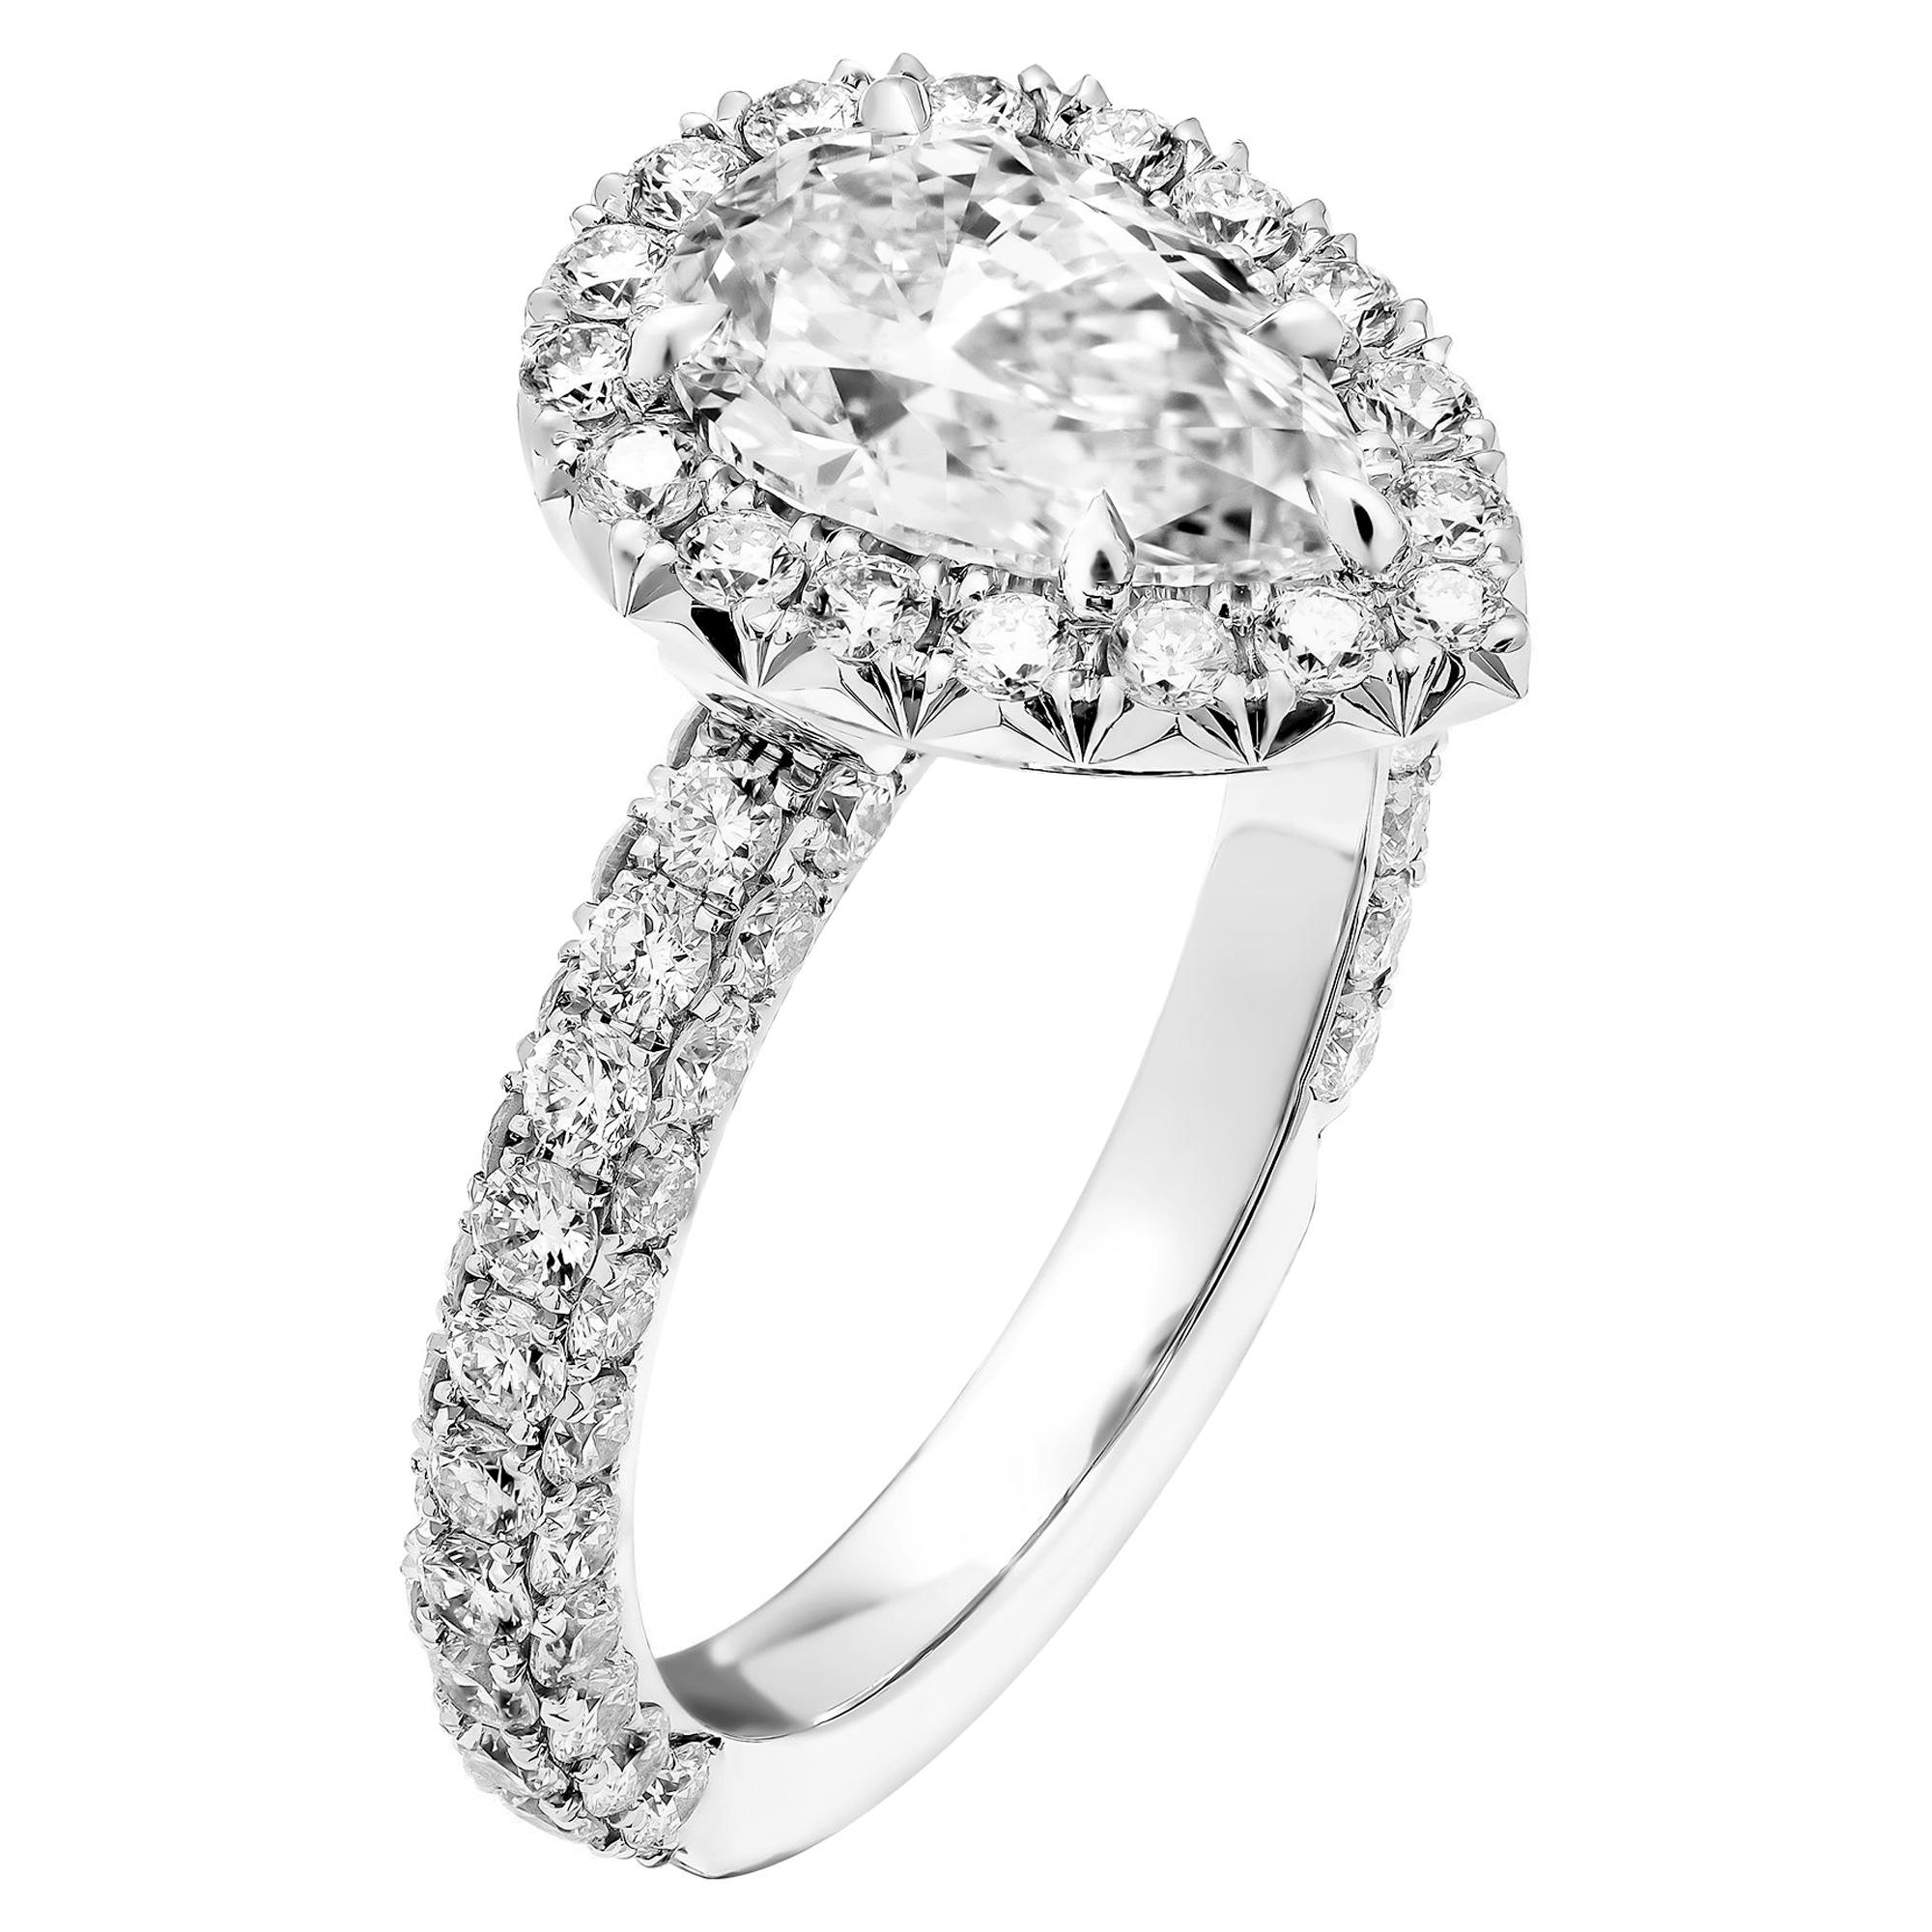 GIA Certificate 1.51 Carat Pear Shape Diamond Engagement Ring For Sale